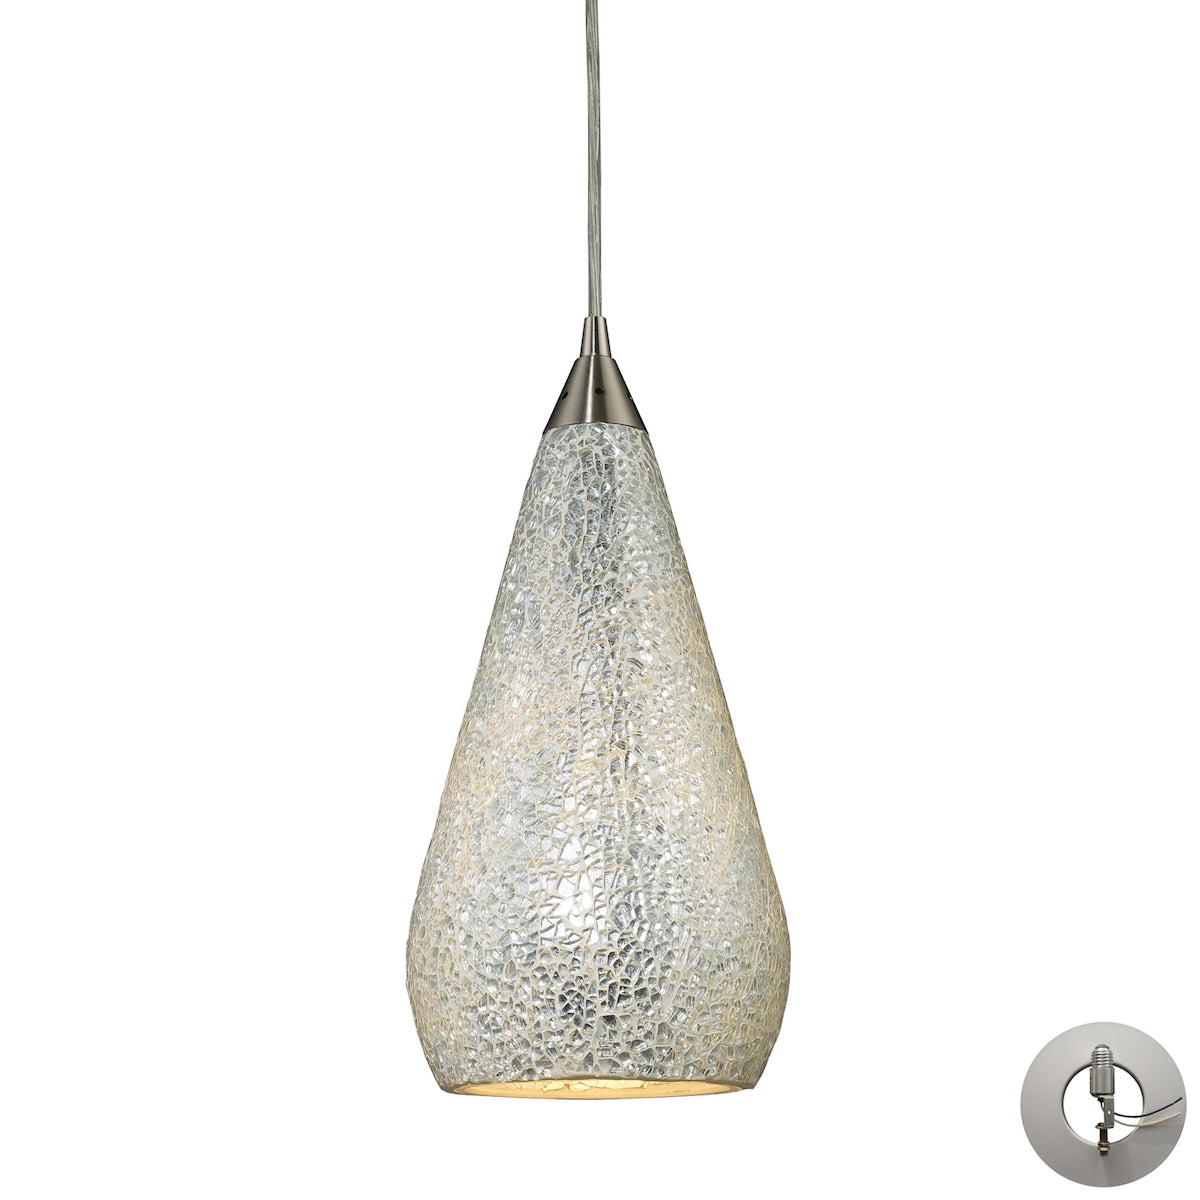 ELK Lighting 546-1SLV-CRC-LA Curvalo 1-Light Mini Pendant in Satin Nickel with Silver Crackle Glass - Includes Adapter Kit